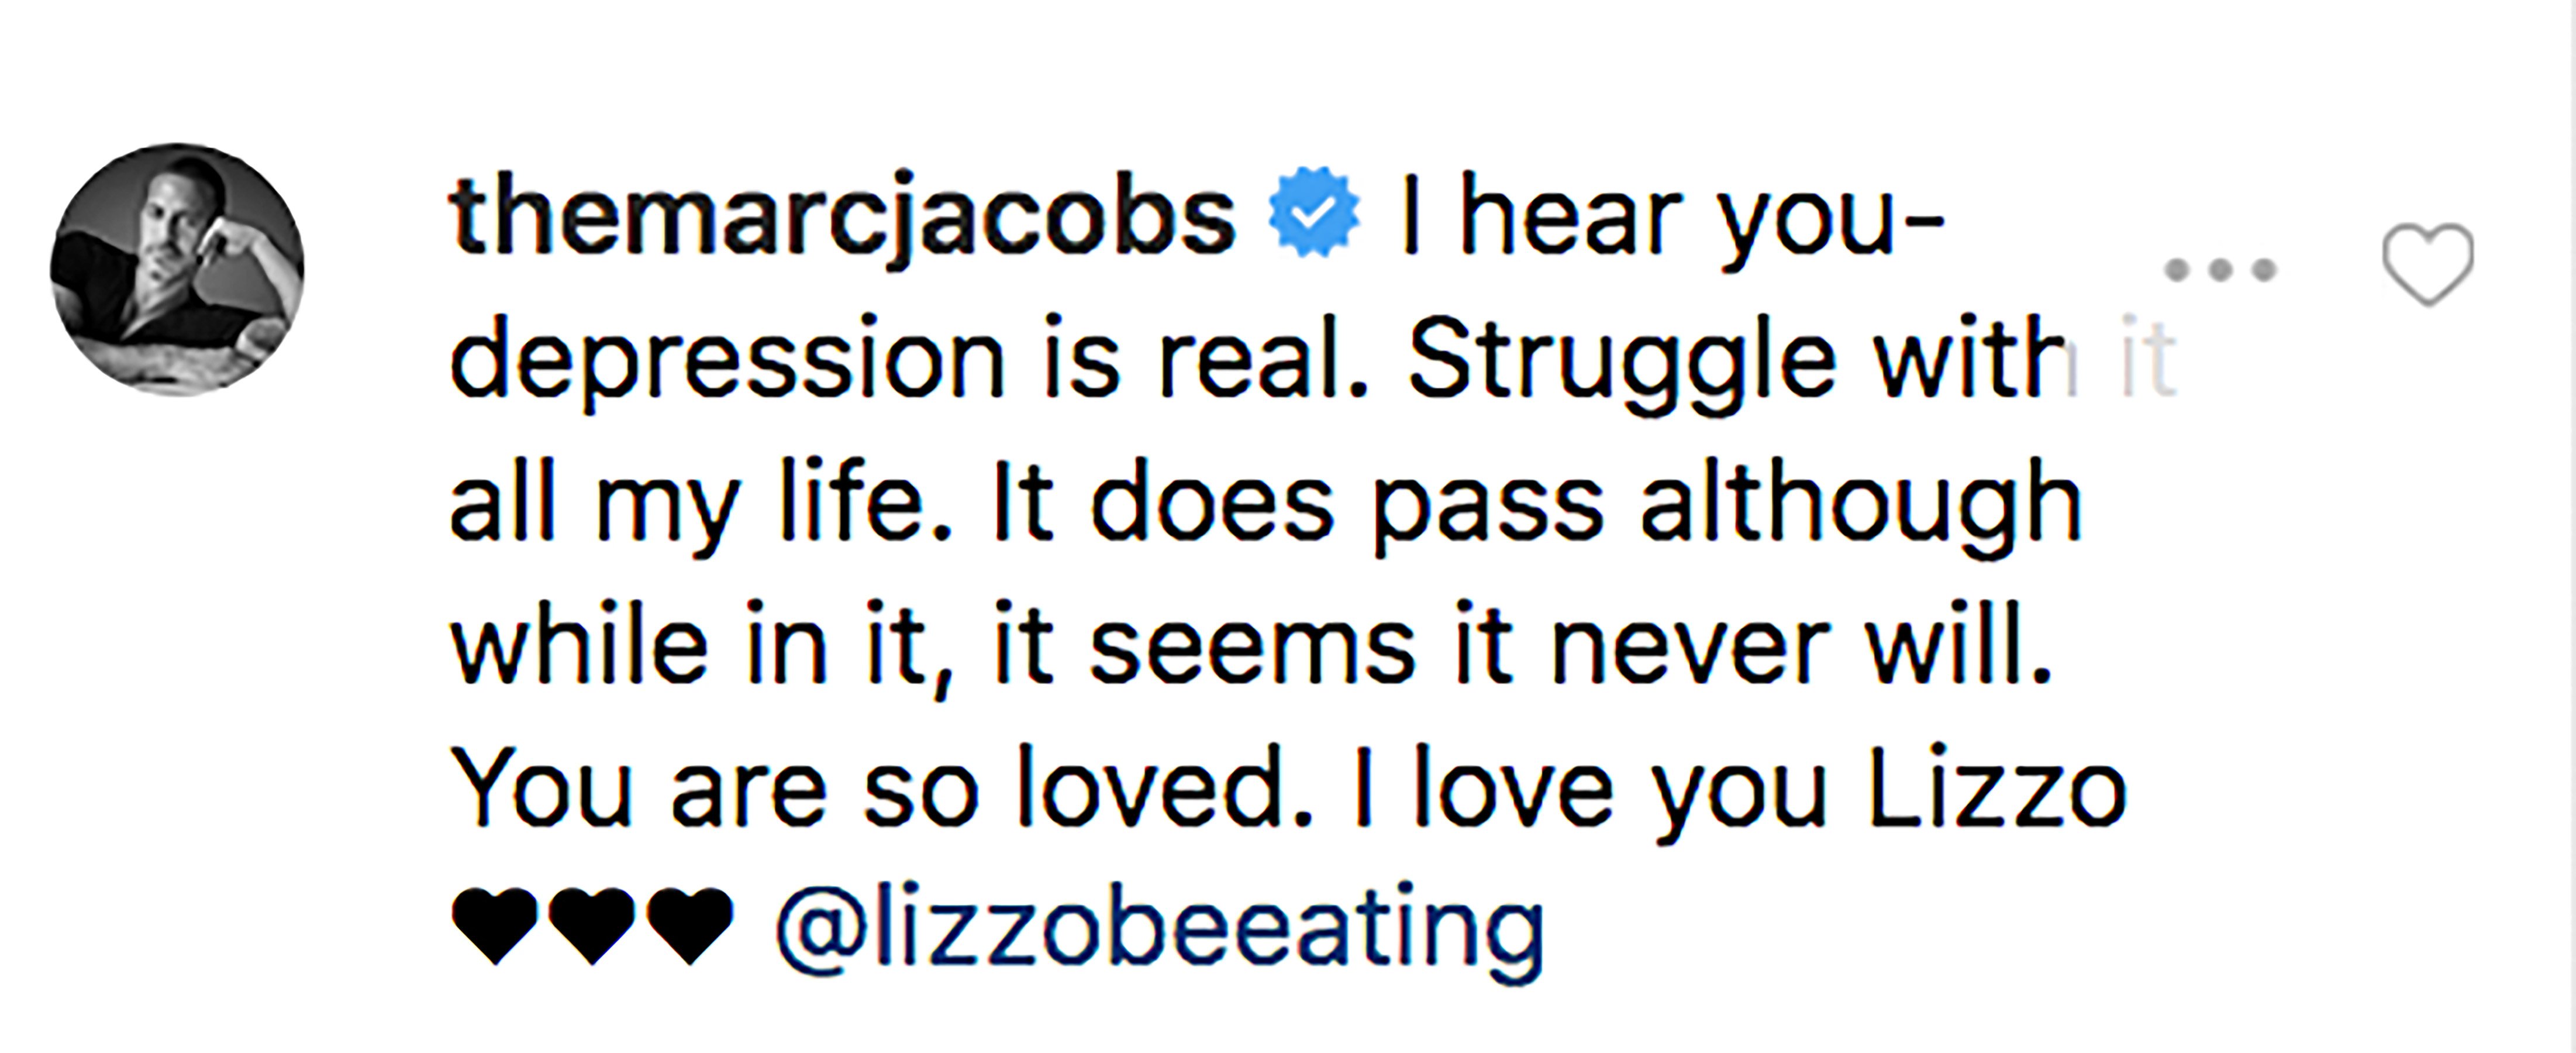 Marc Jacobs comment on Lizzo's post. | Source: Instagram/lizzobeeating